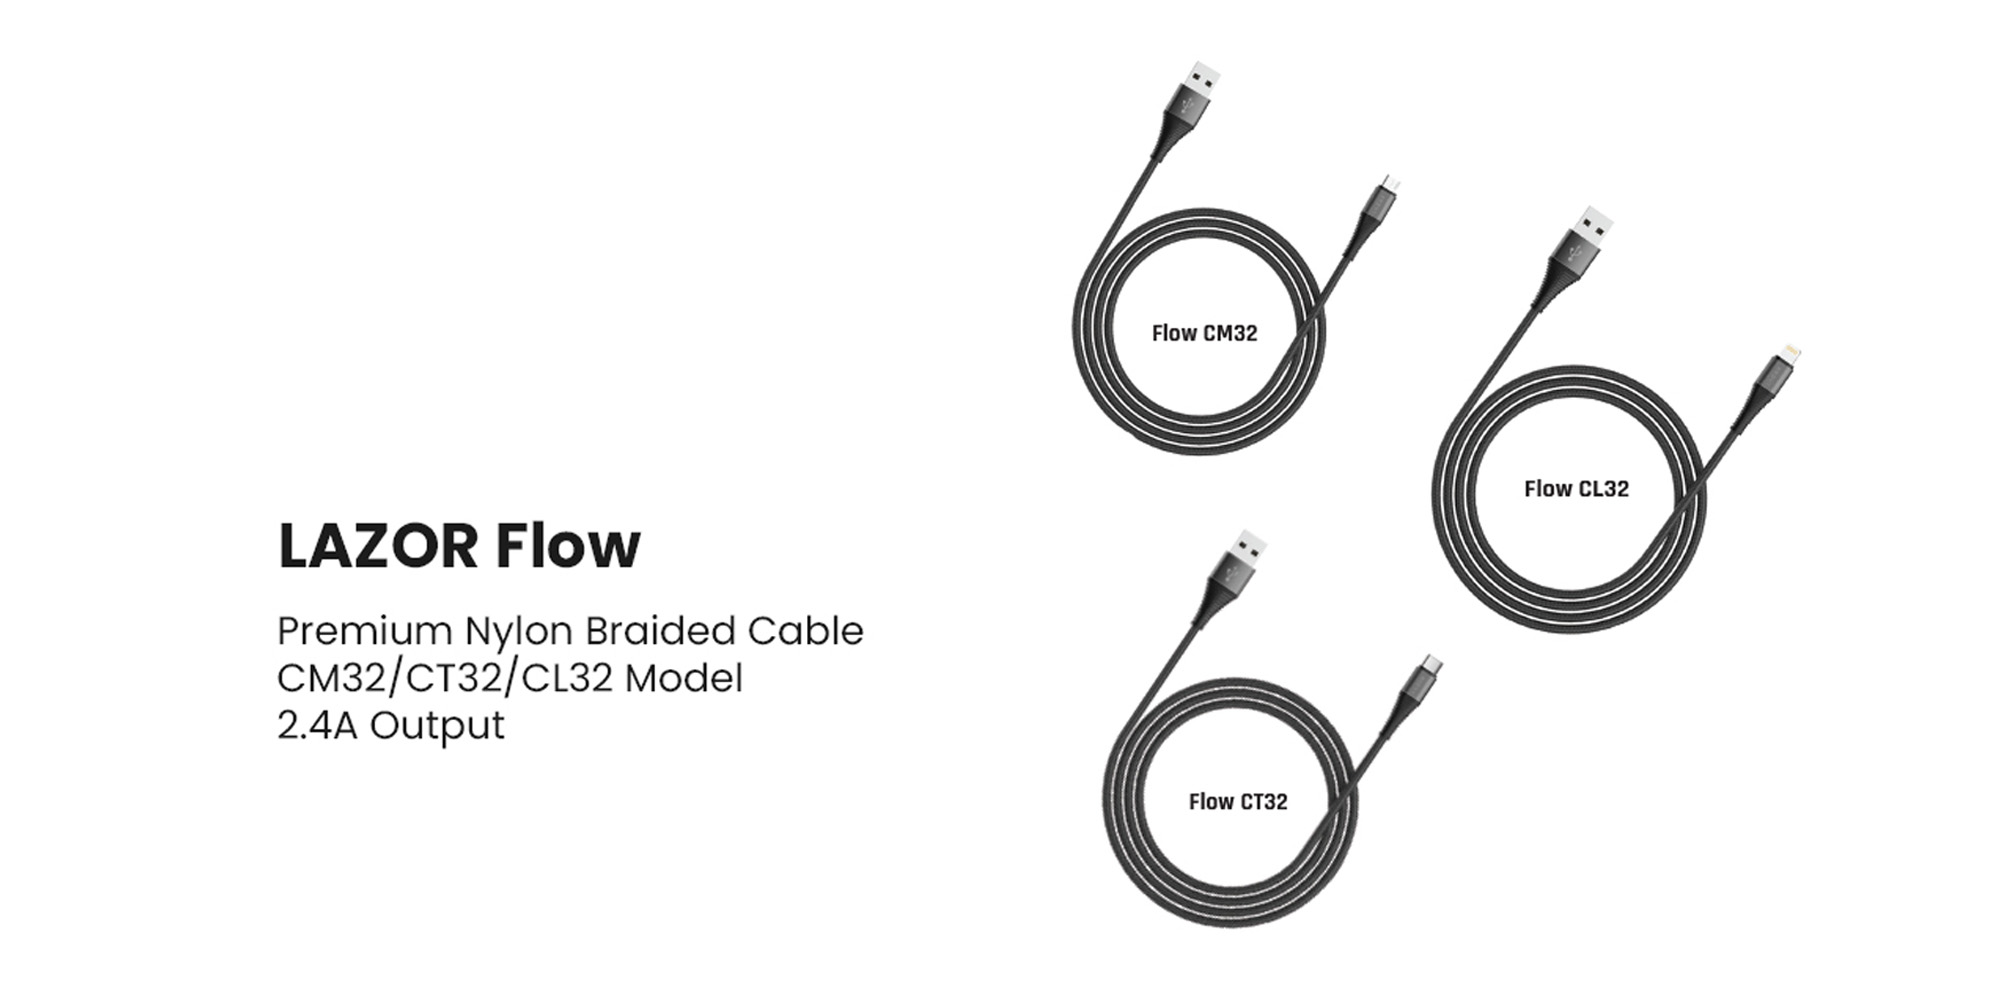 LAZOR Flow CT32: USB-A to Type-C Fast Charging Cable, Premium 1 Meter, 2.4A Fast Sync and Charge Cable - Black